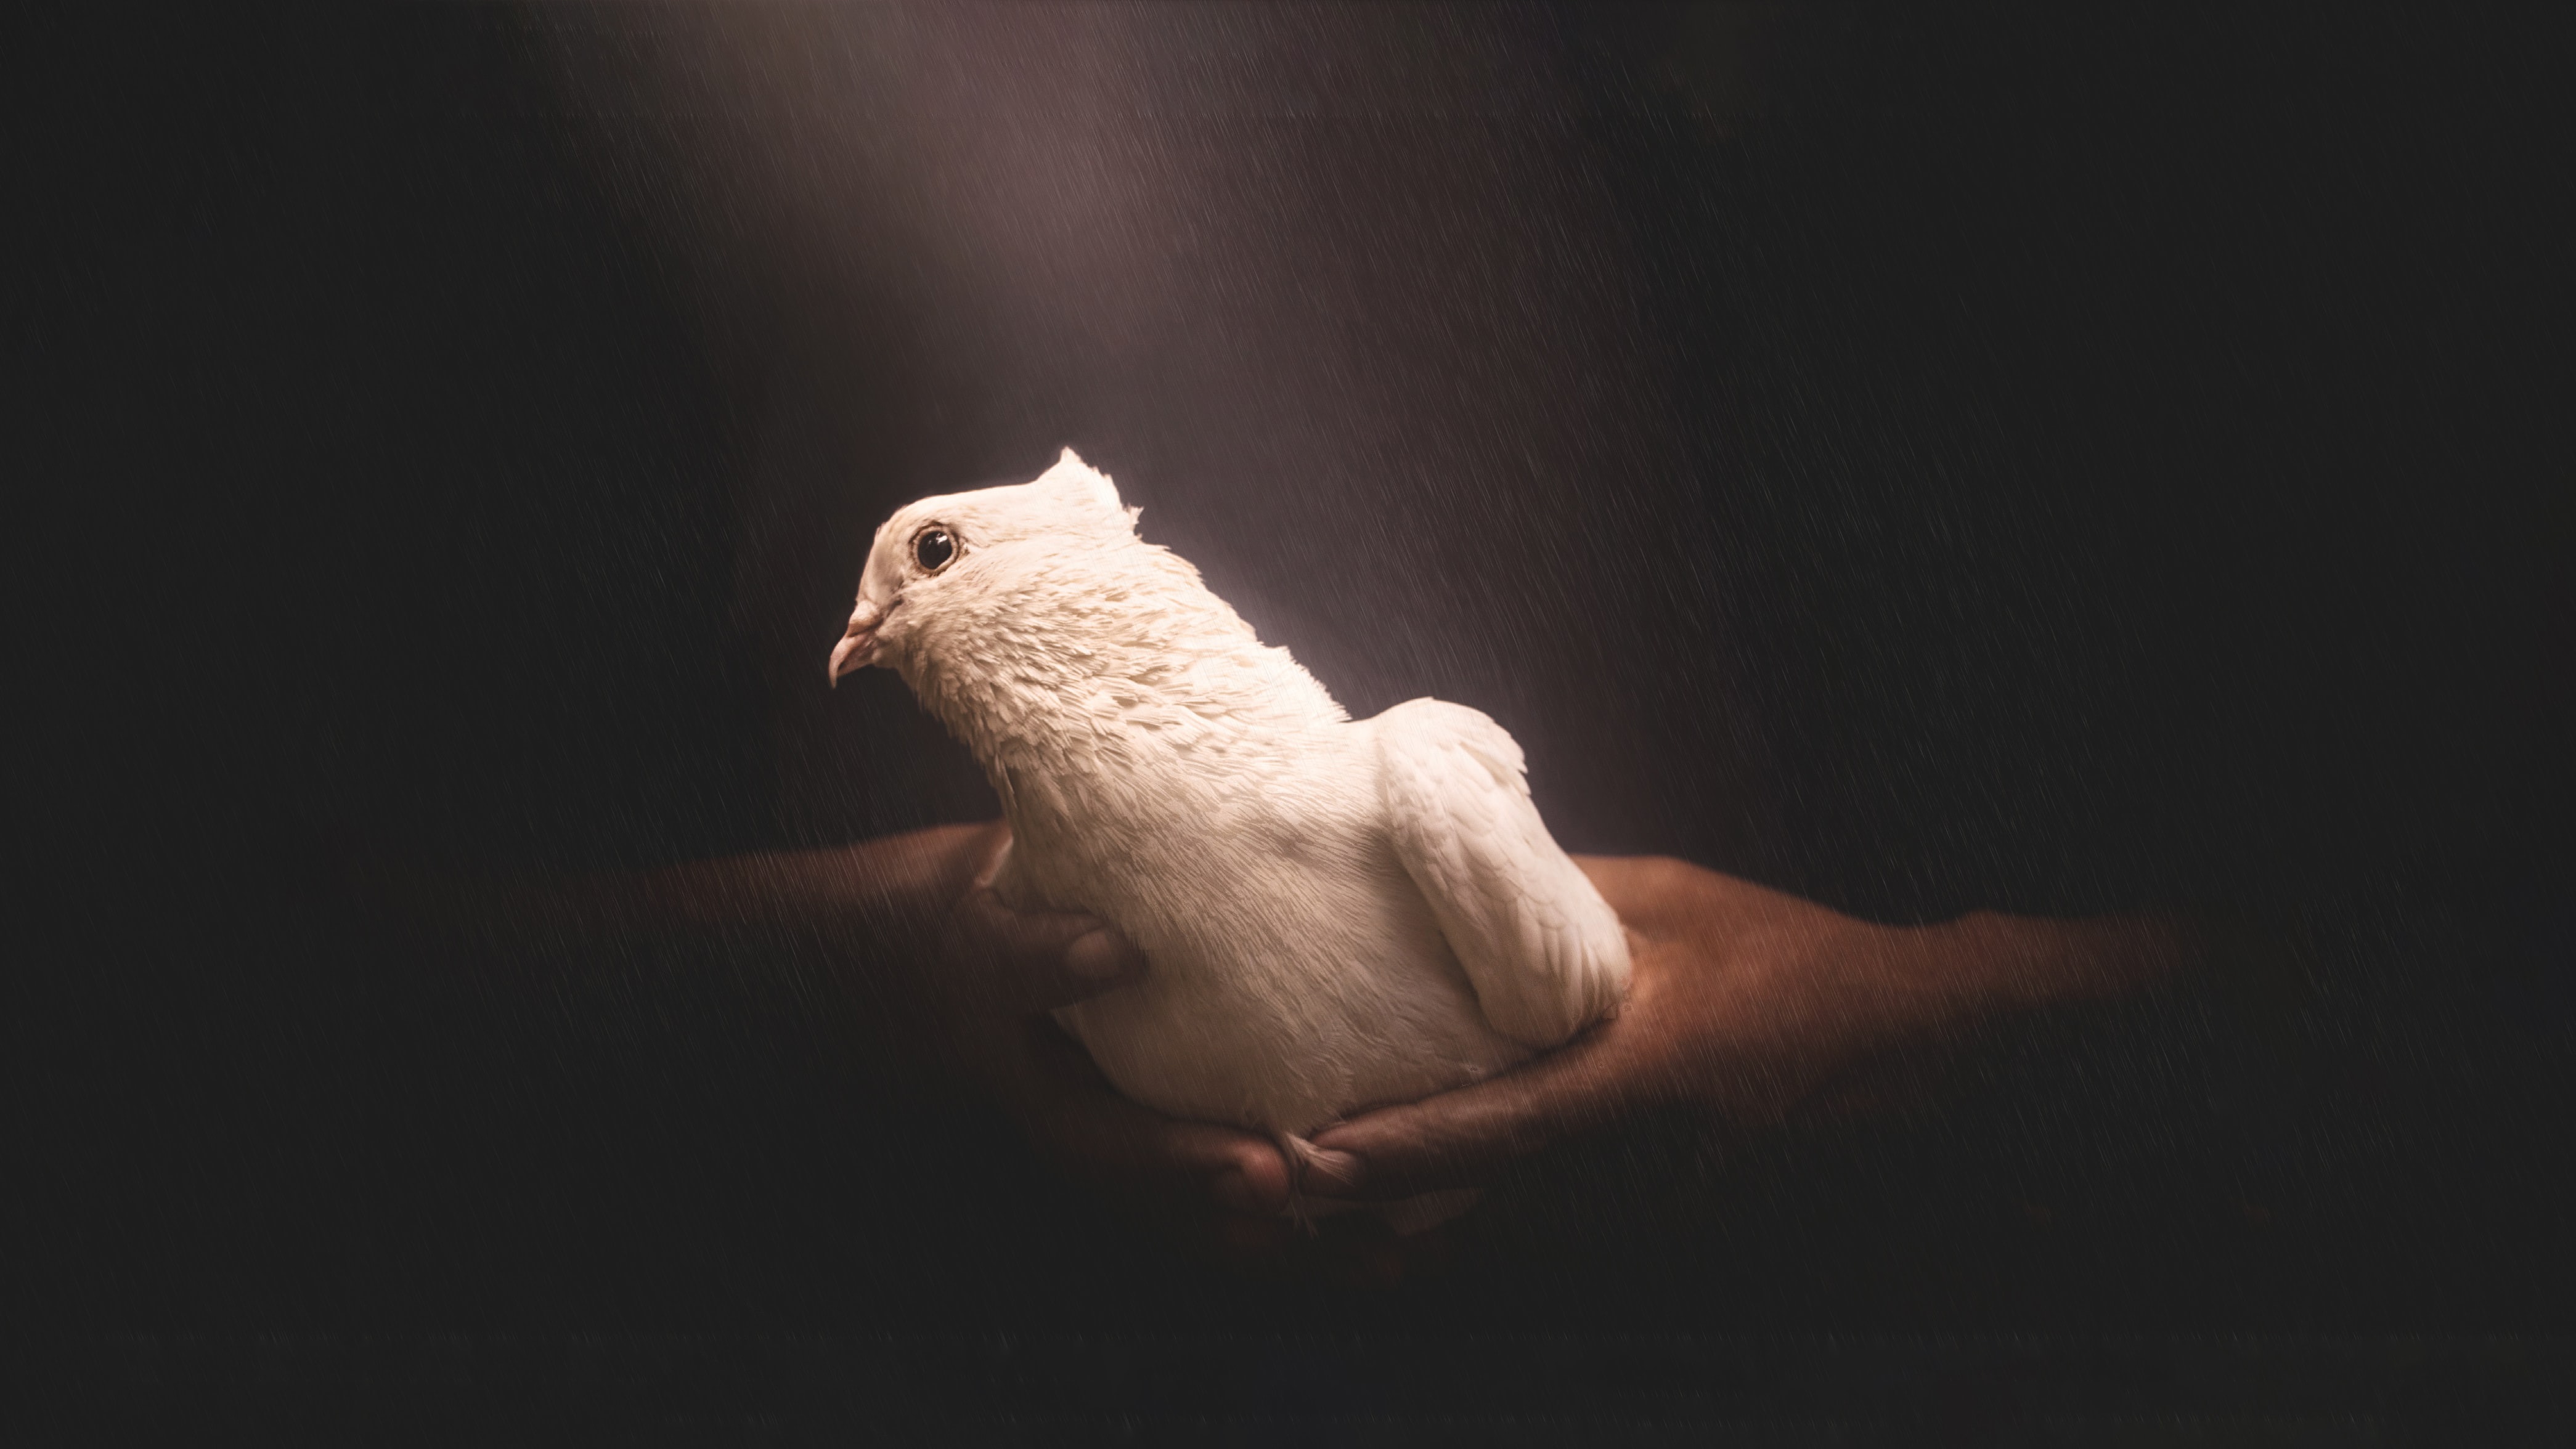 A dove lighting your journey